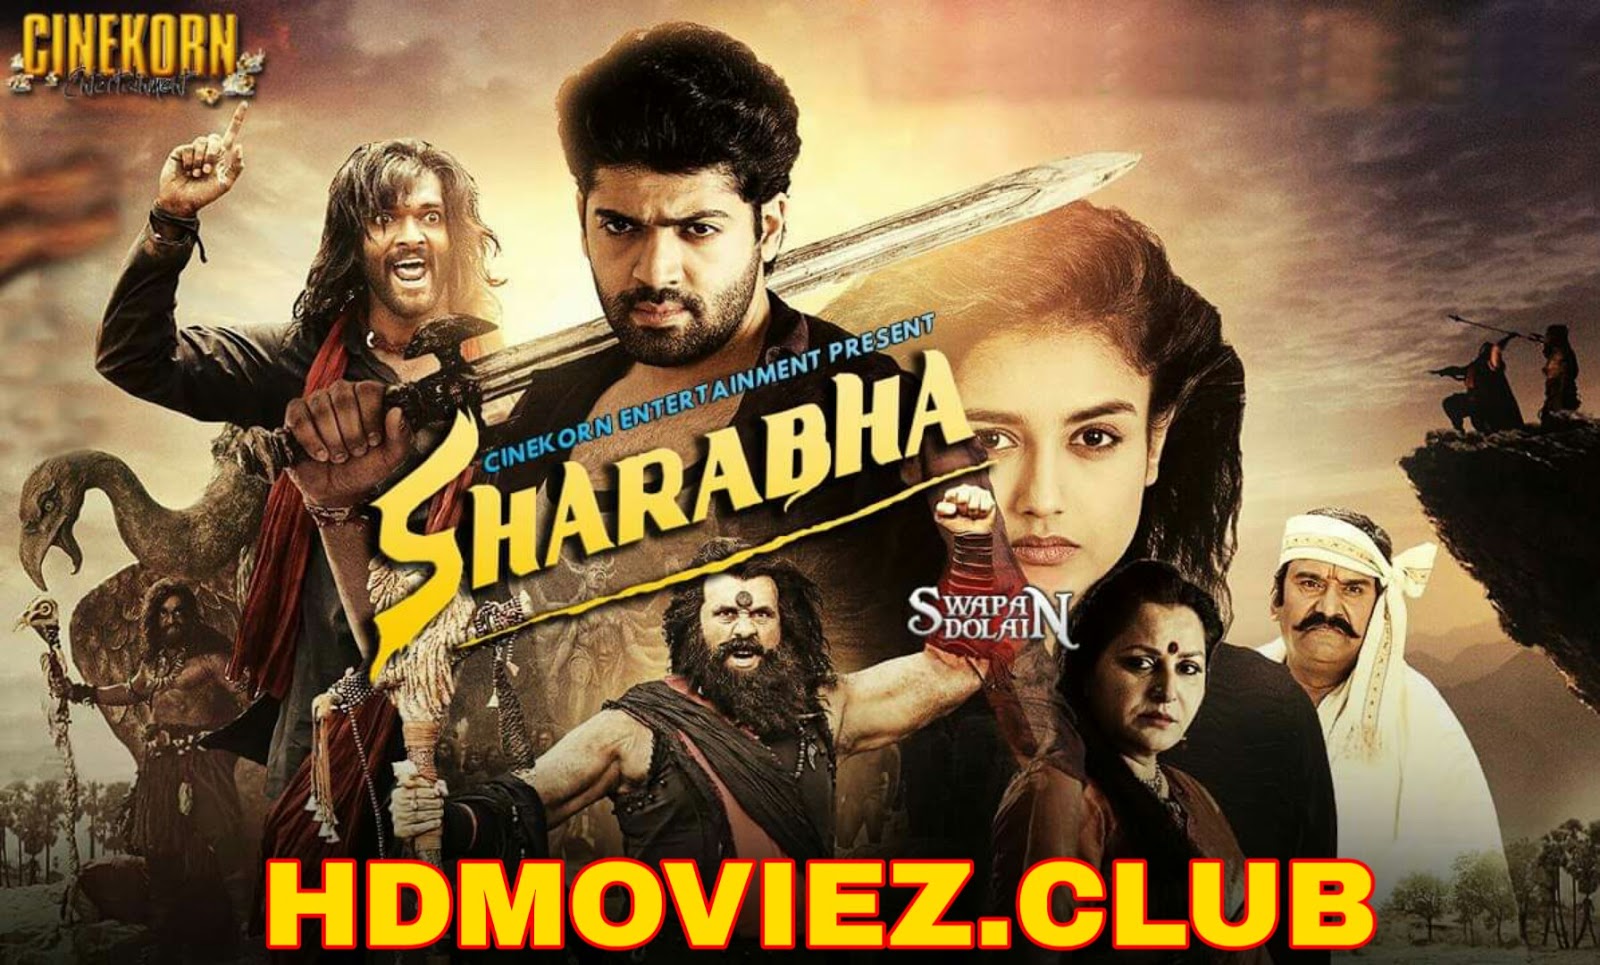 movies 2019 full movie hindi dubbed Wallpapers.